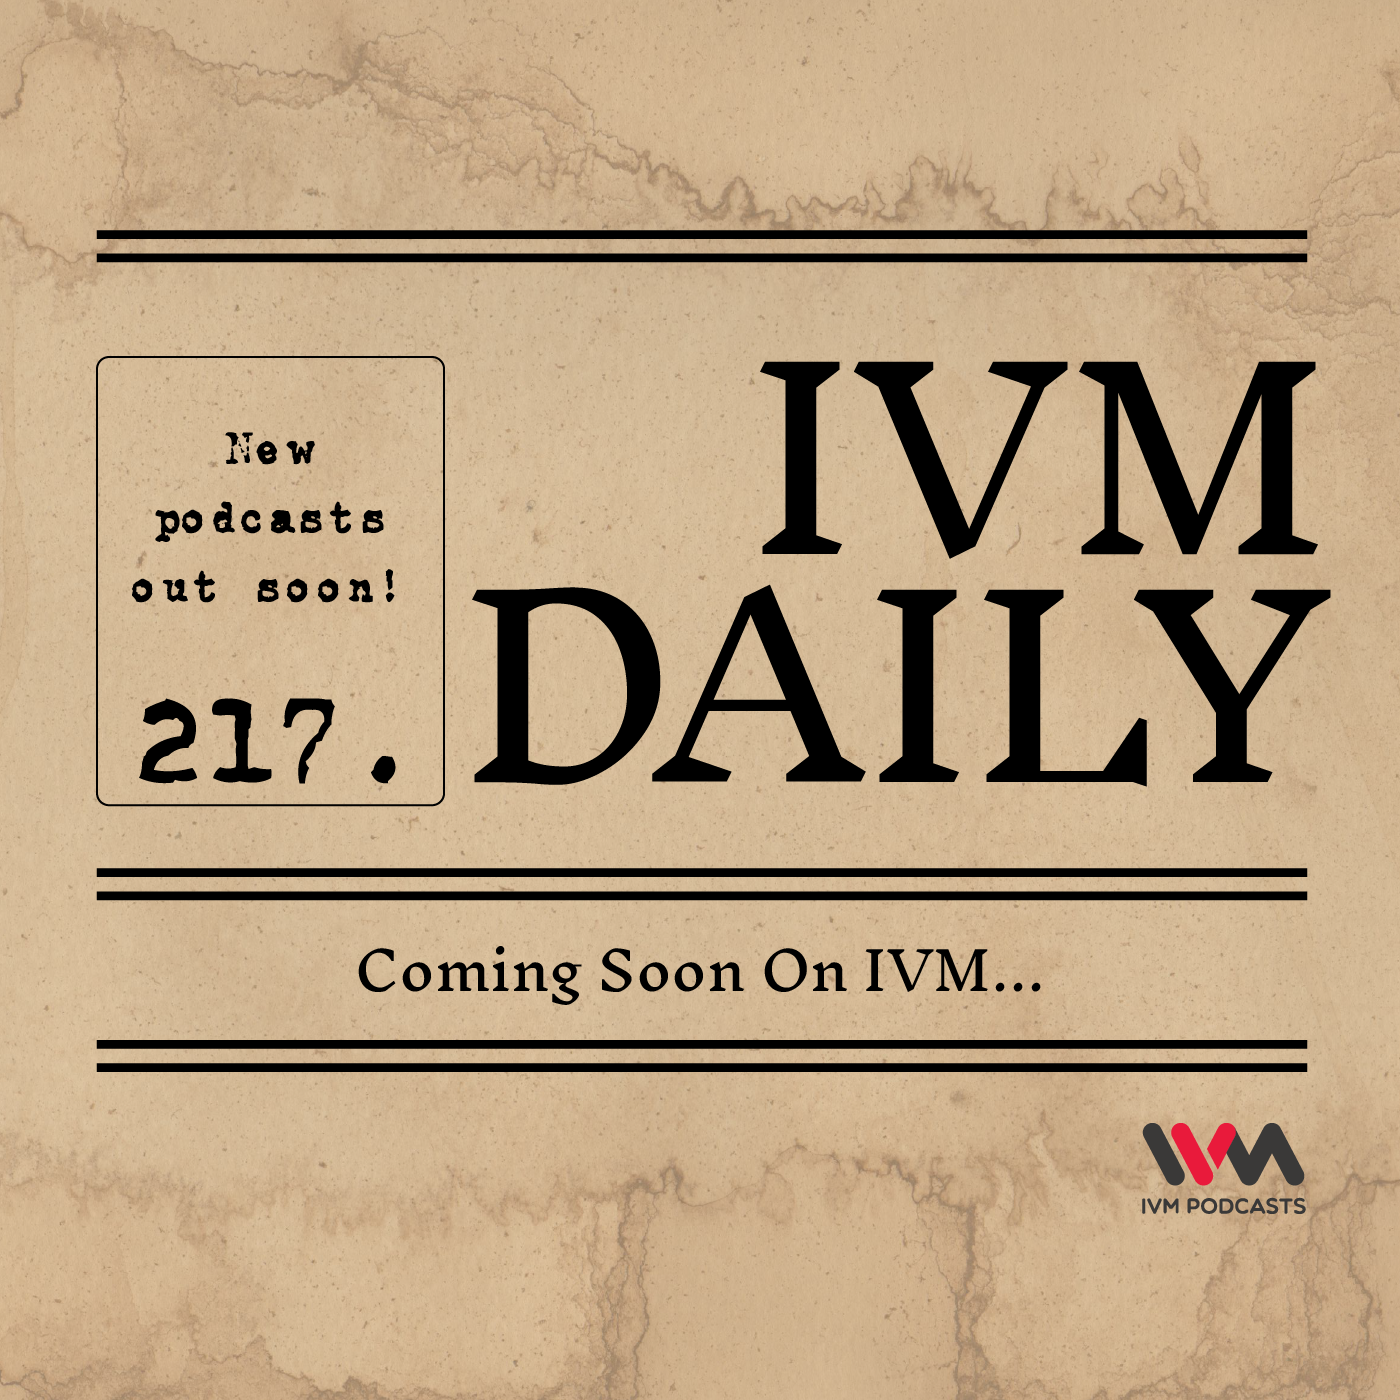 IVM Daily Ep. 217: Coming Soon On IVM...